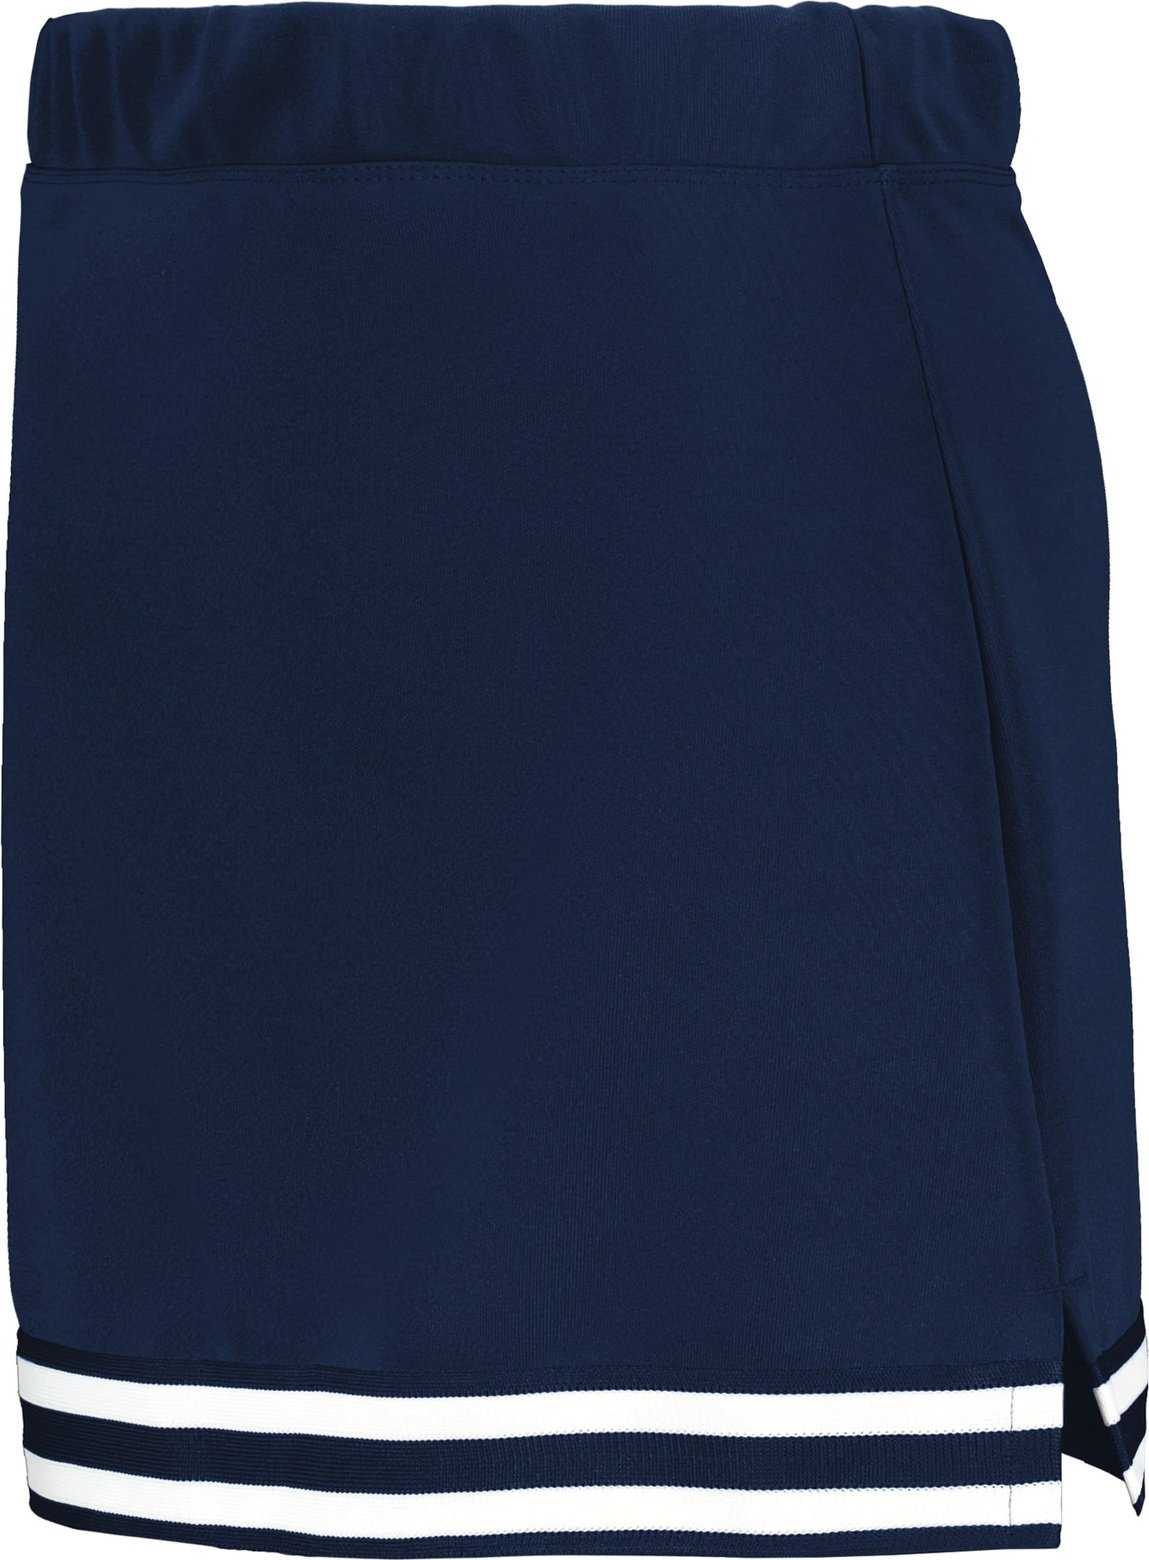 Augusta 6925 Ladies Cheer Squad Skirt - Royal Royal White - HIT a Double